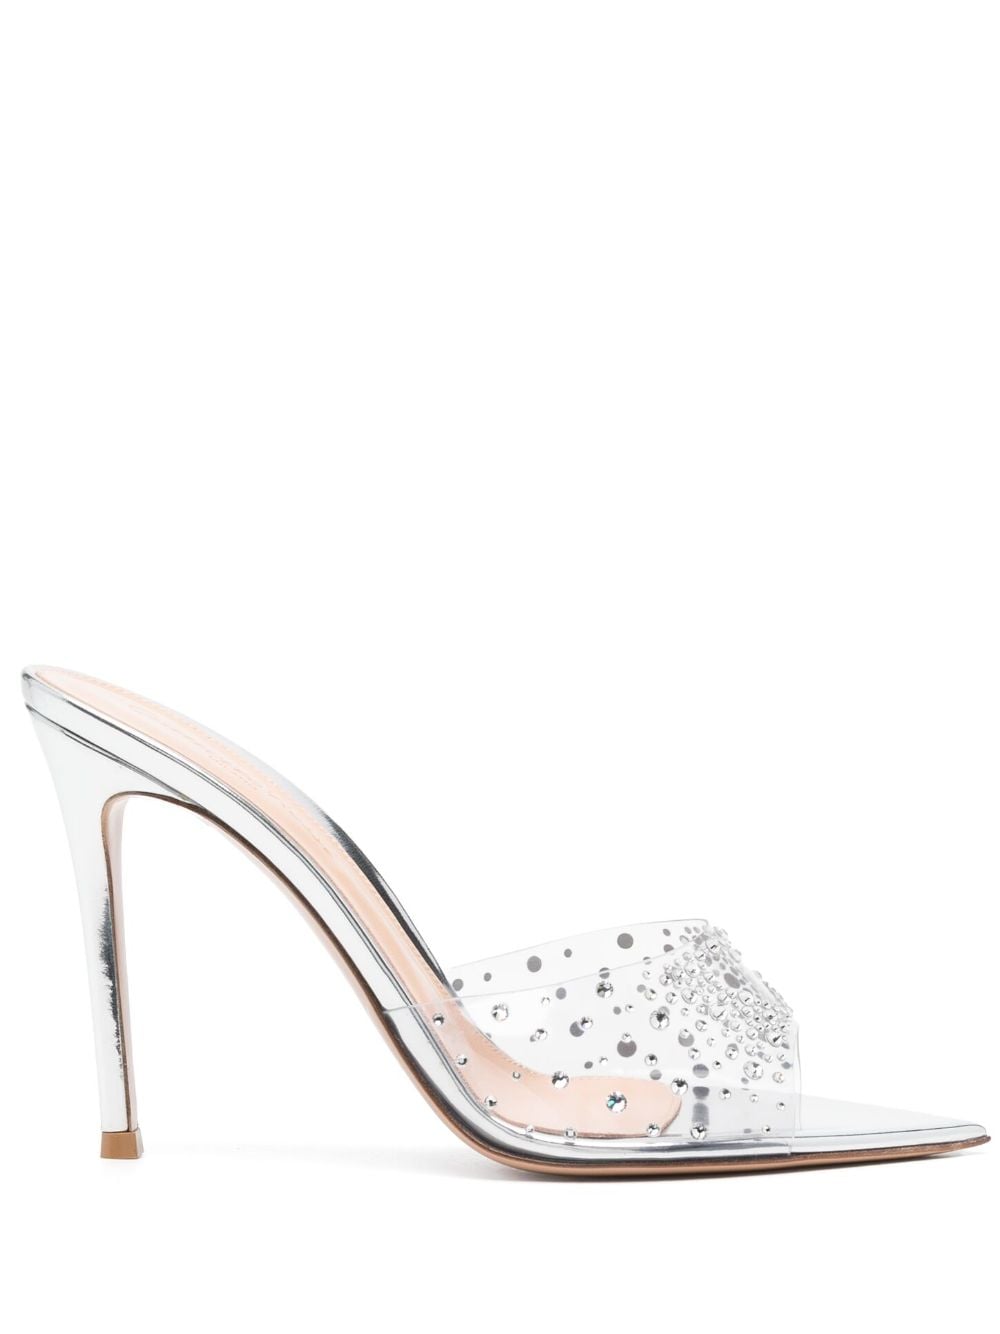 Gianvito Rossi Elle crystal-embellished 110mm mules - Silver von Gianvito Rossi